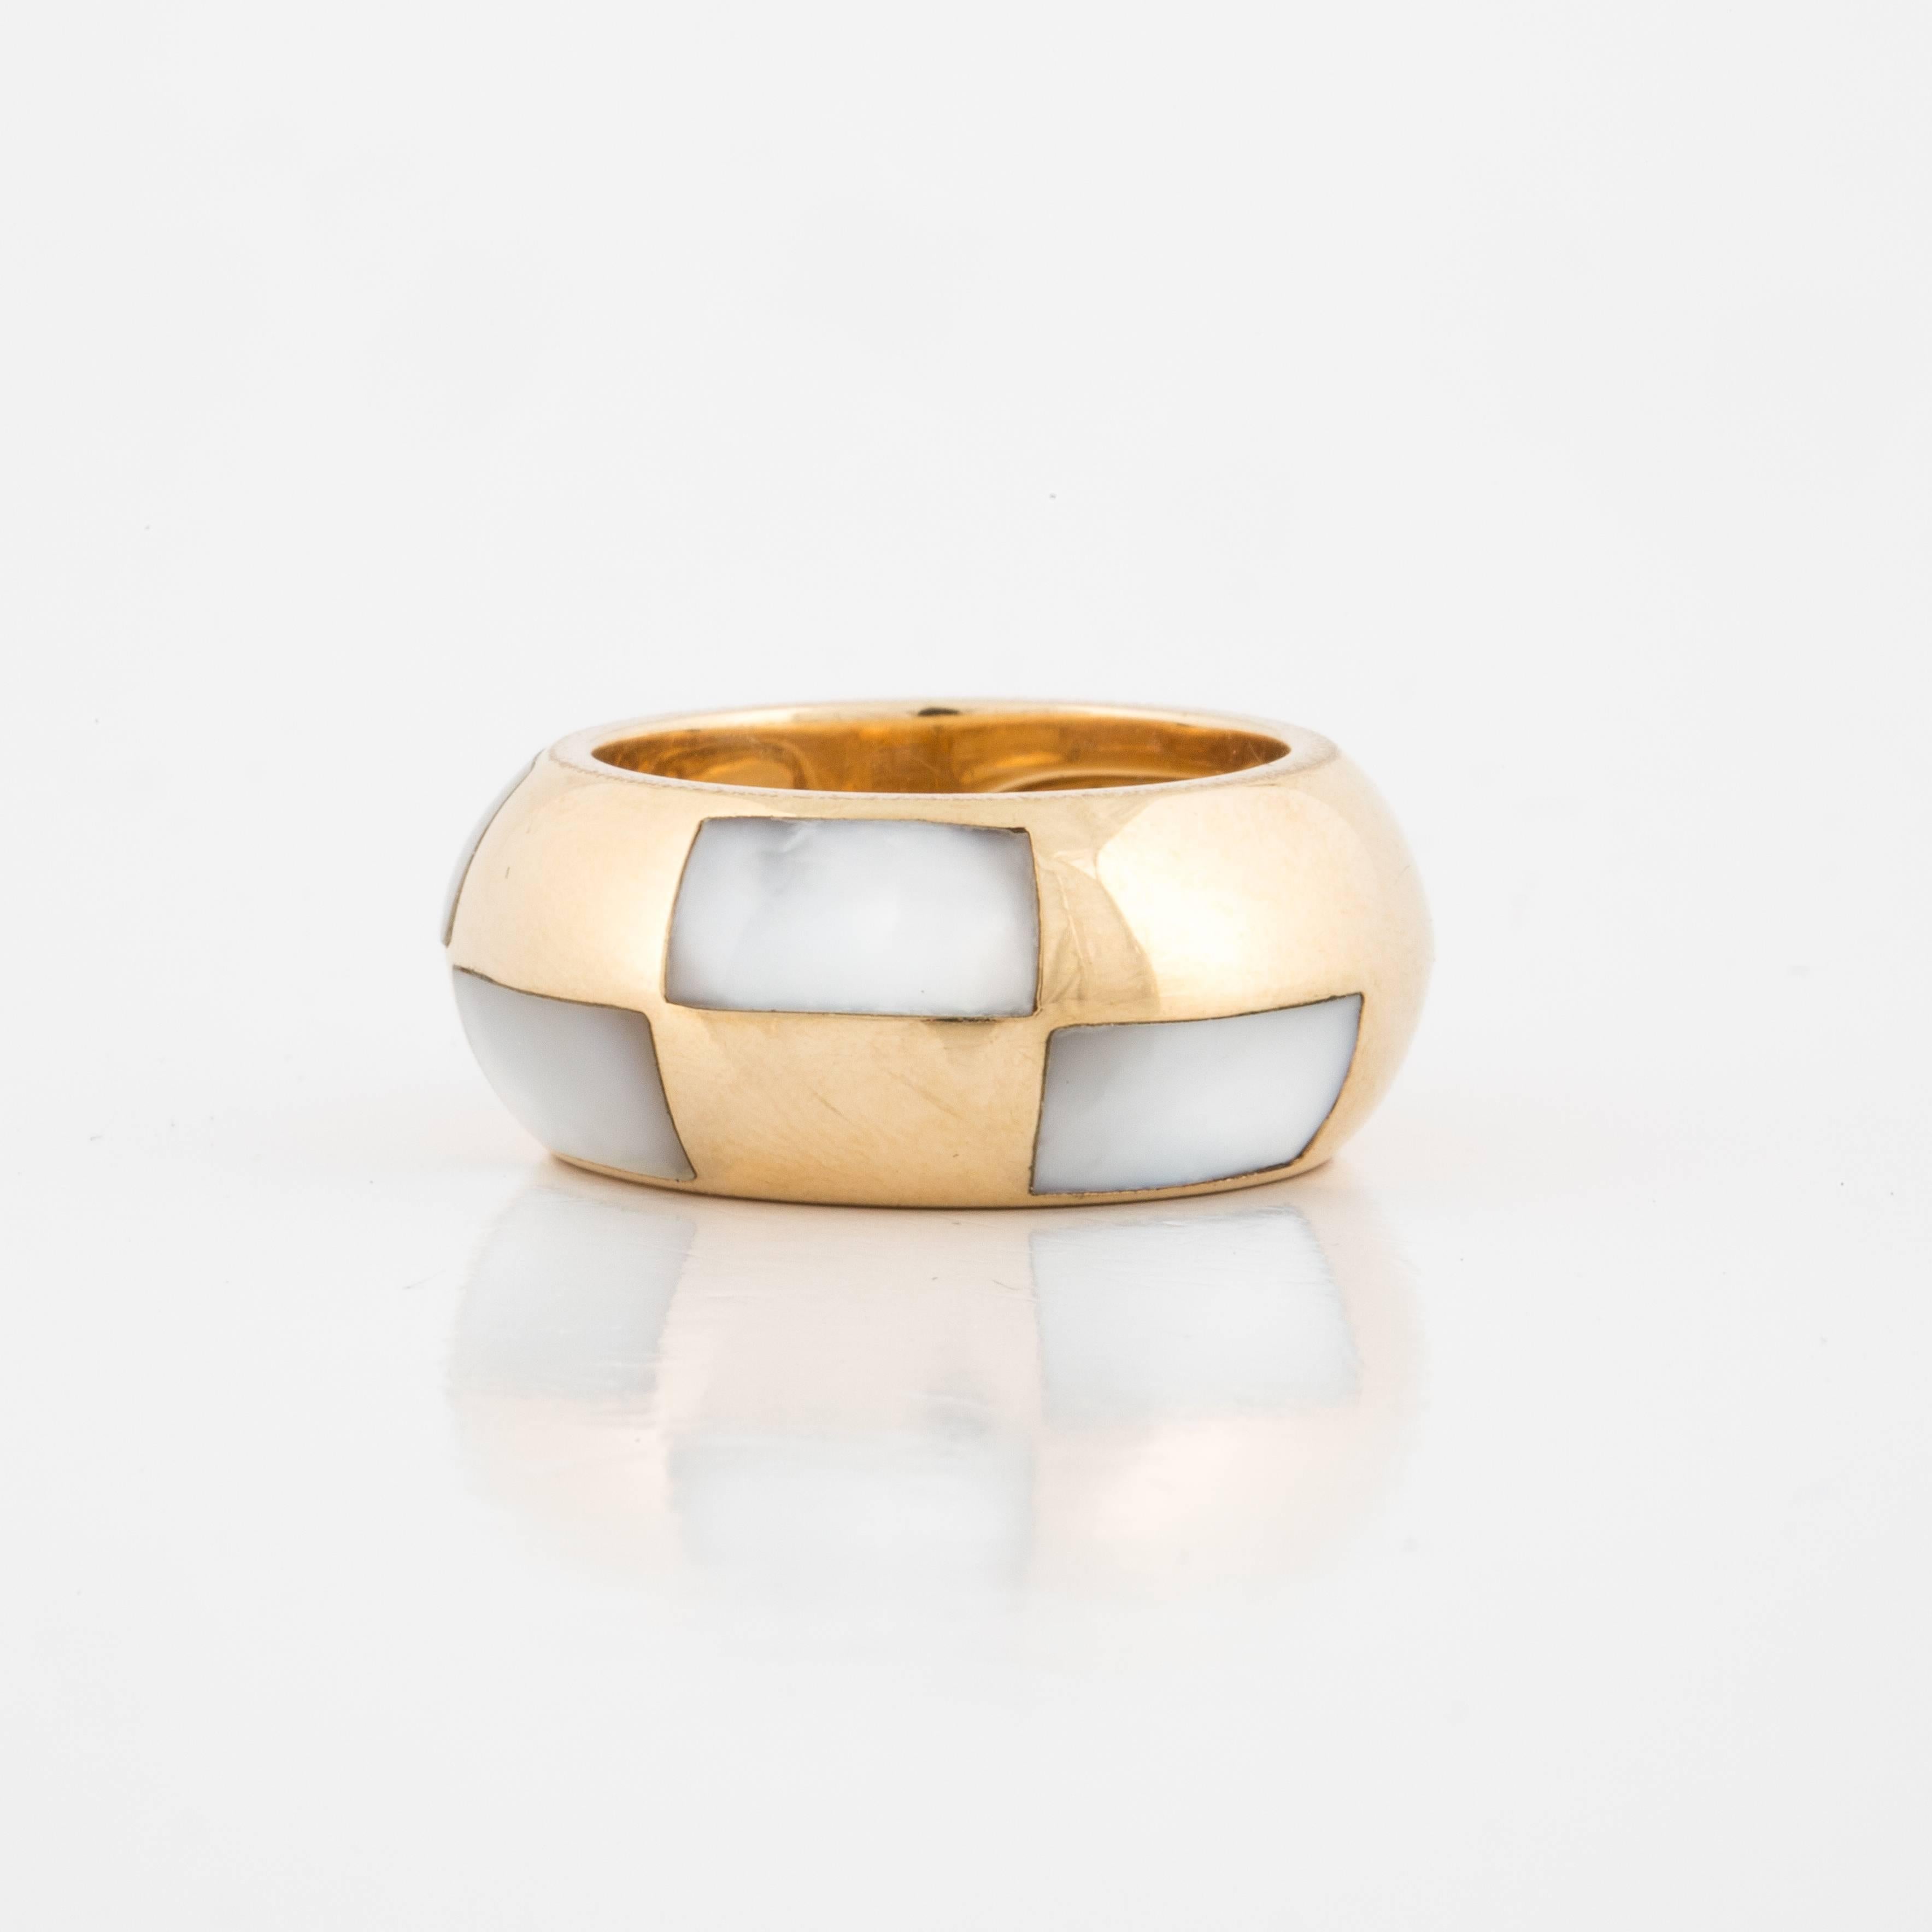 Mauboussin band in 18K yellow gold with mother-of-pearl inlay.  The band is marked on the inside 